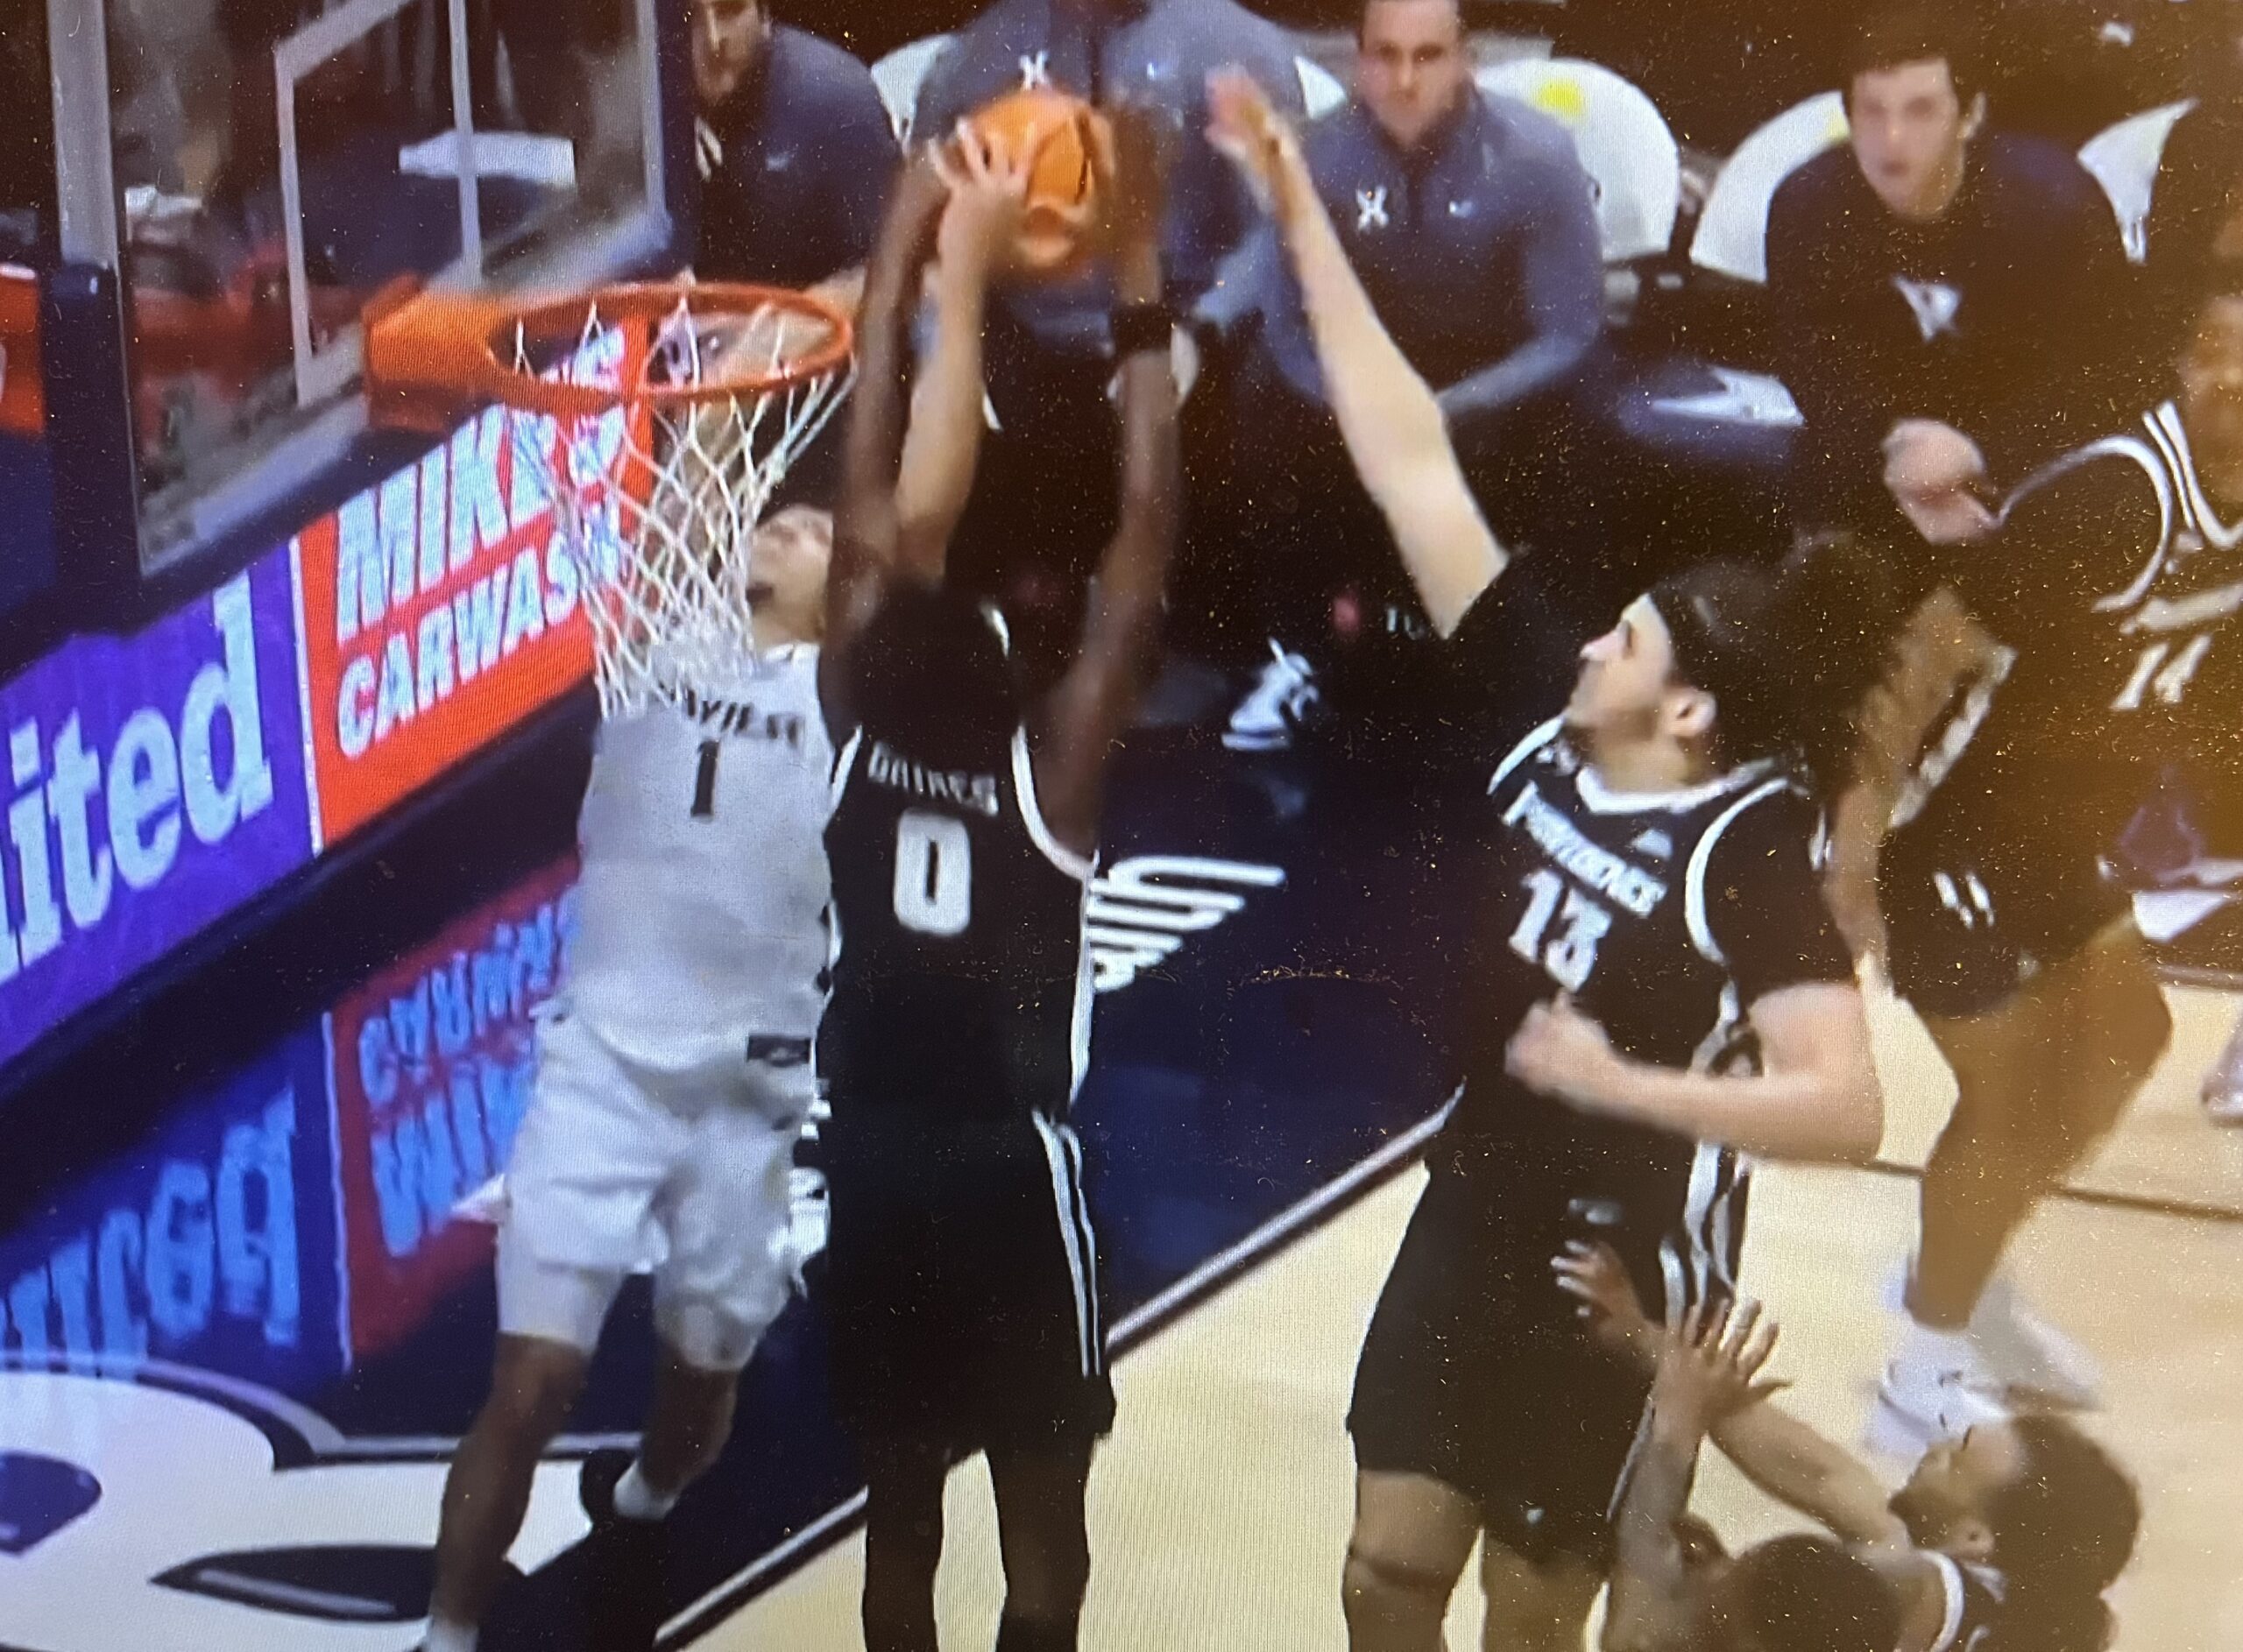 Blocked: Friars deny Xavier, take giant step with big road win